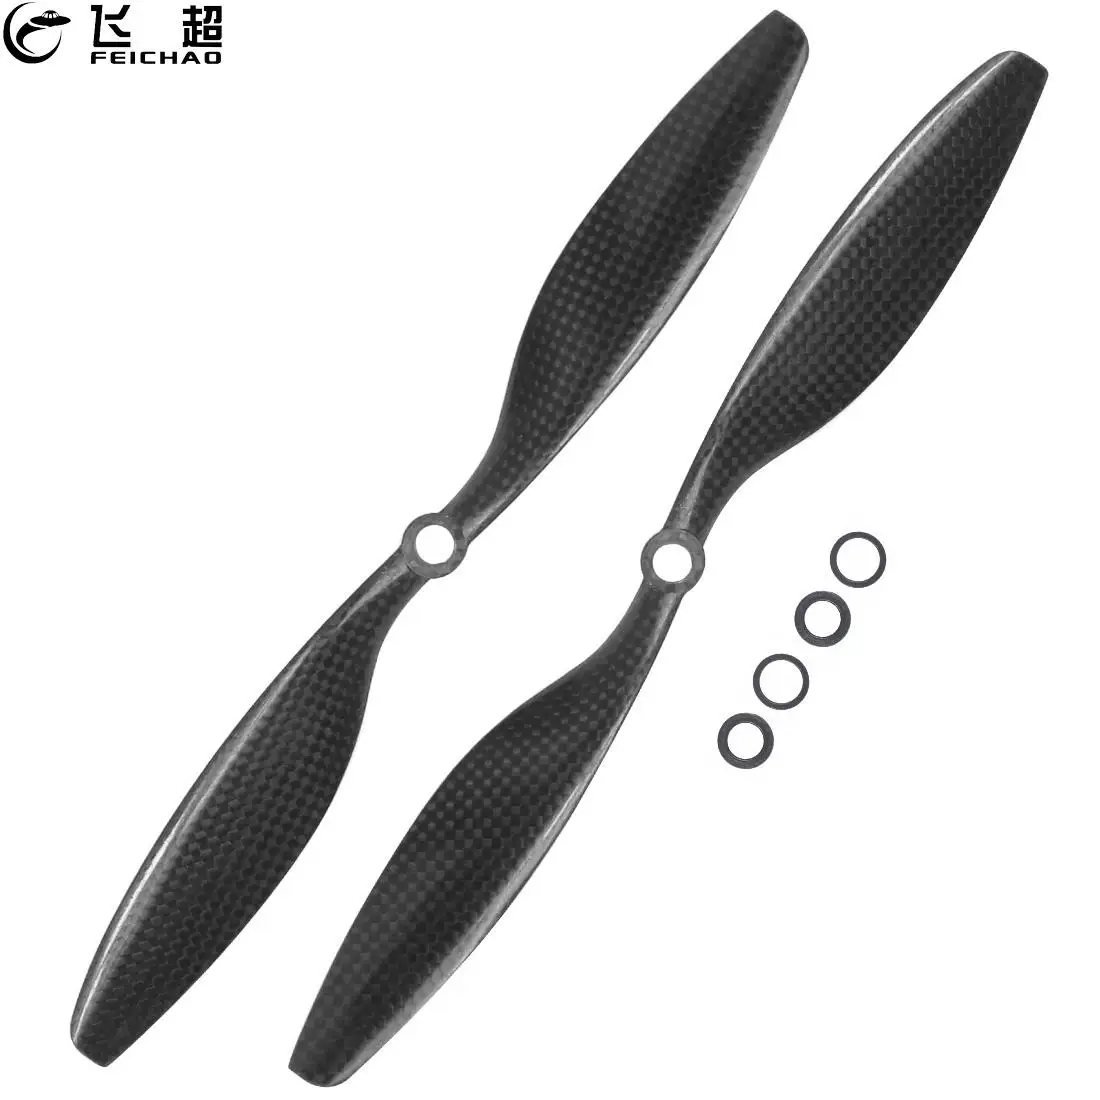 

1Pair 10x4.5 3K Carbon Fiber Propeller CW CCW 1045 1045R Props For RC Quadcopter Hexacopter Multi Rotor UFO Drone Accessory